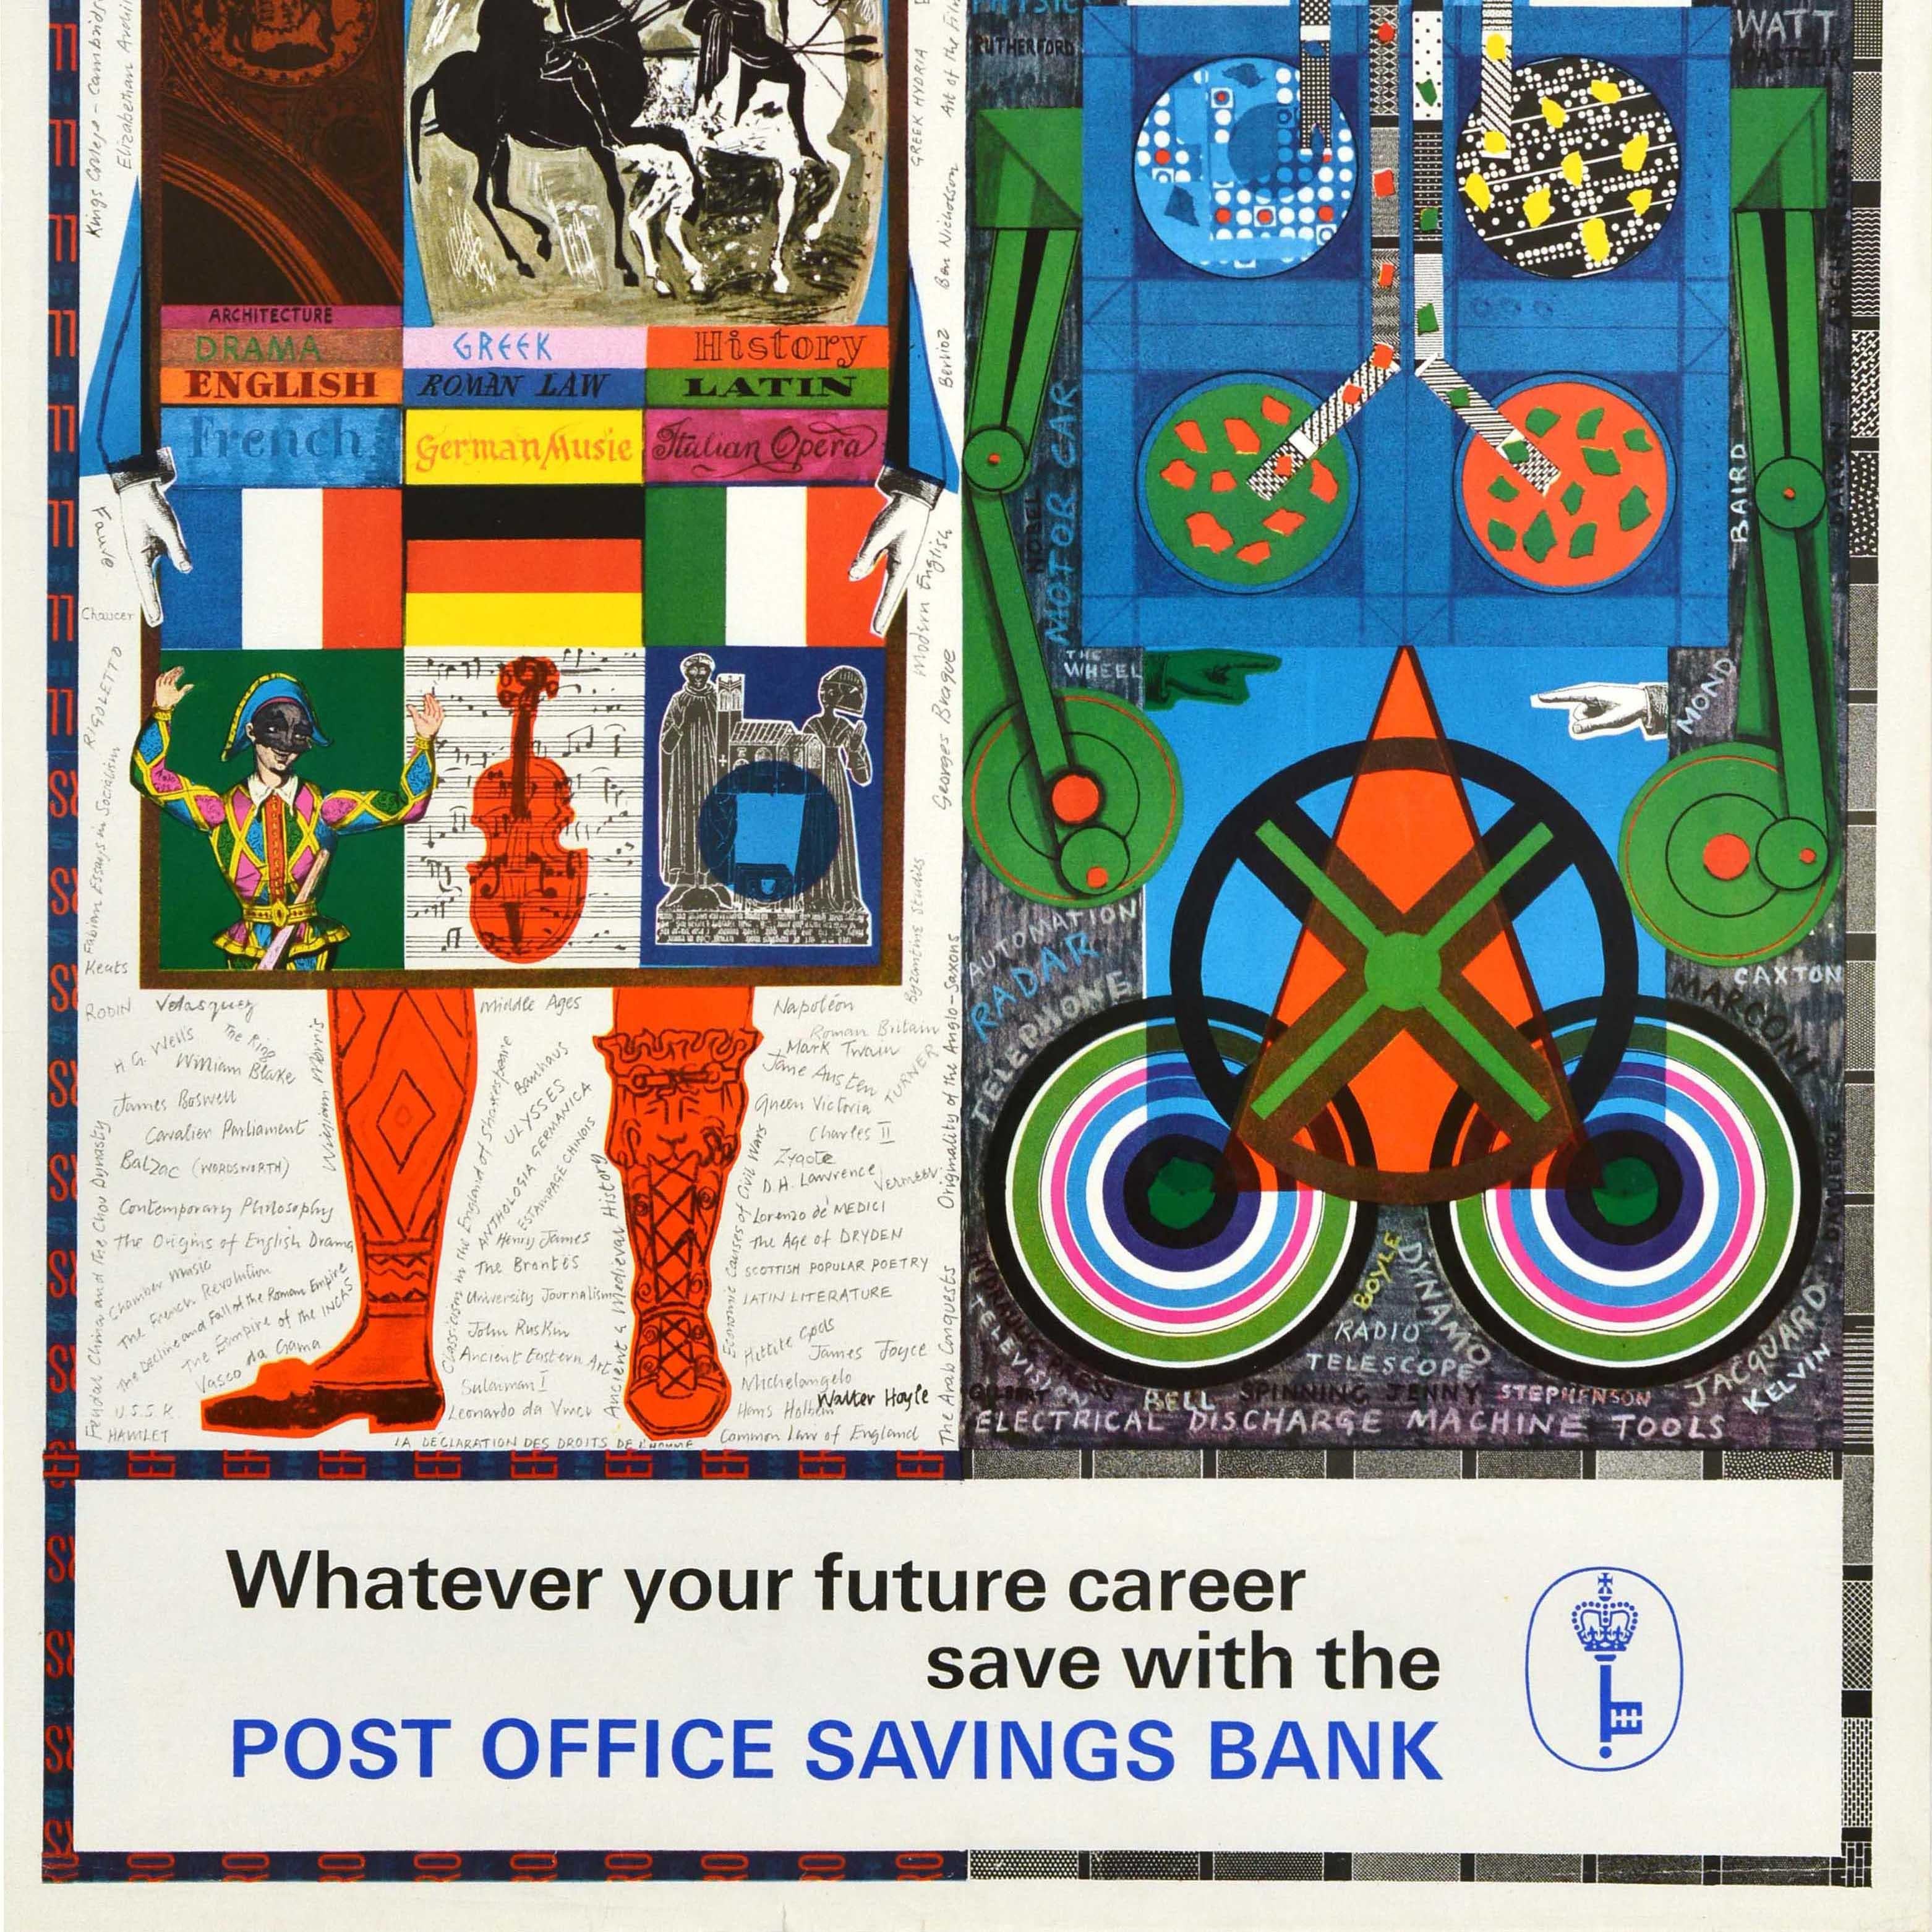 Original vintage advertising poster - Whatever your future career Save with the Post Office Savings Bank - featuring a great design into two parts: an image on the left side of William Shakespeare holding a collage with various illustrations